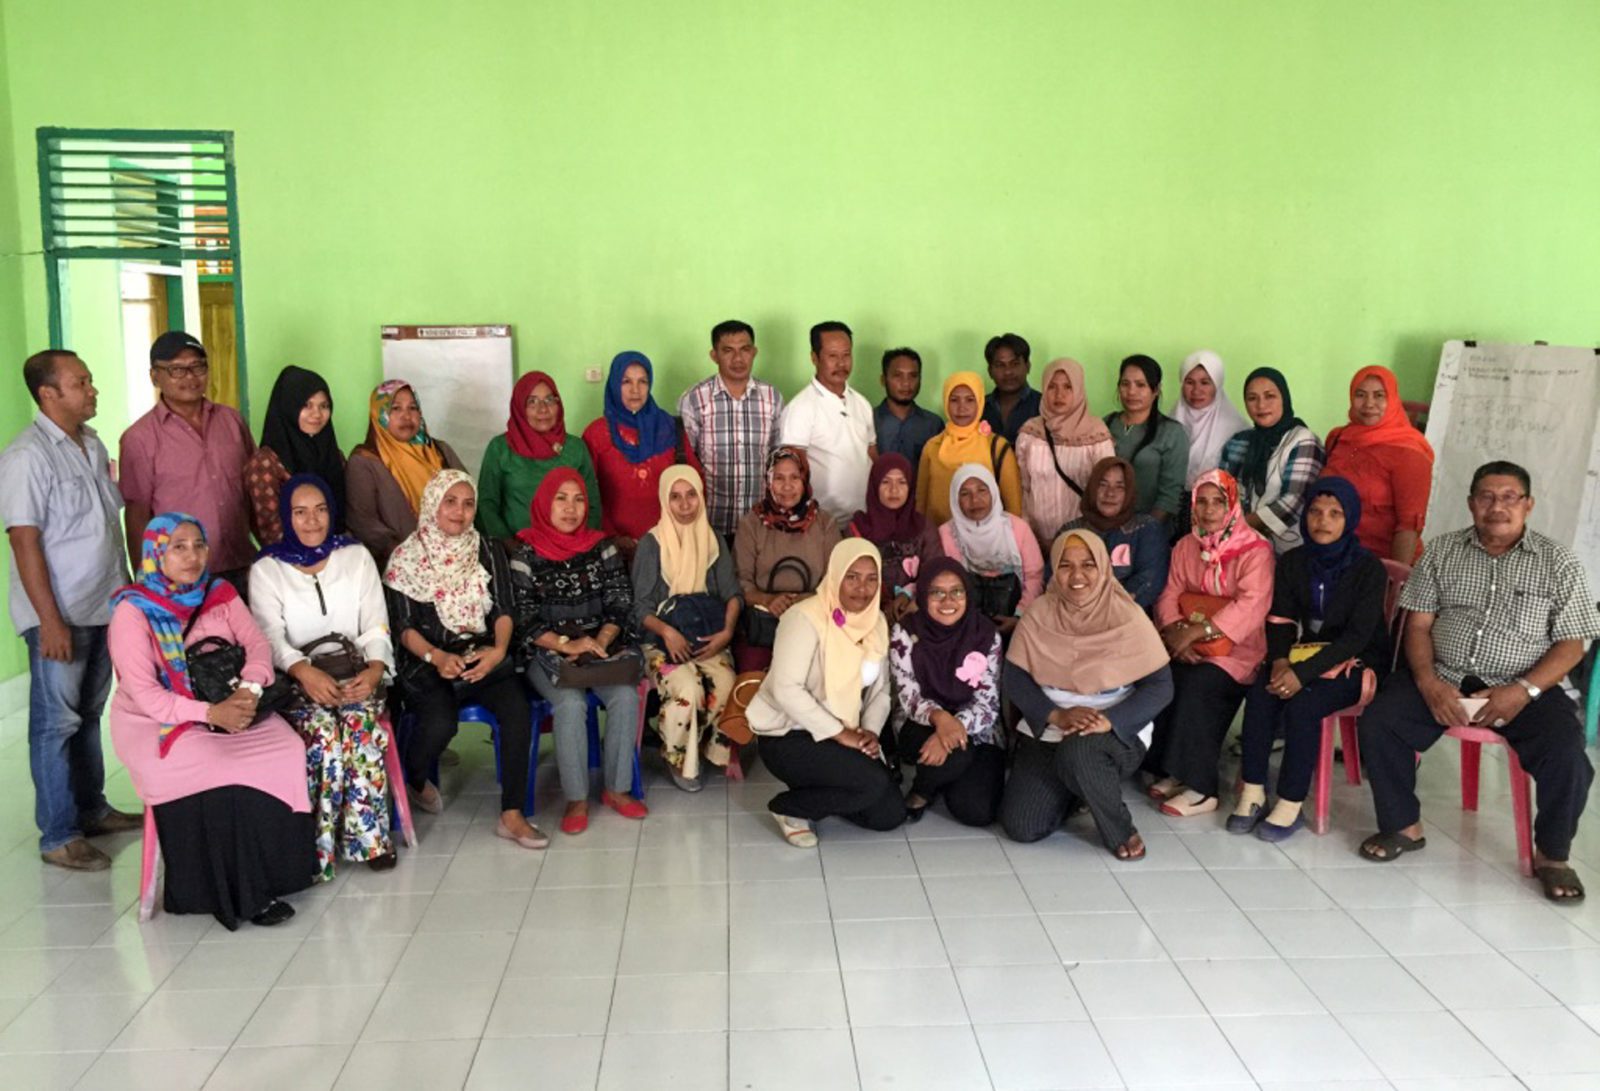 A group photo of all the cross-training workshop leaders and participants | Photo: Ratih Pertiwi